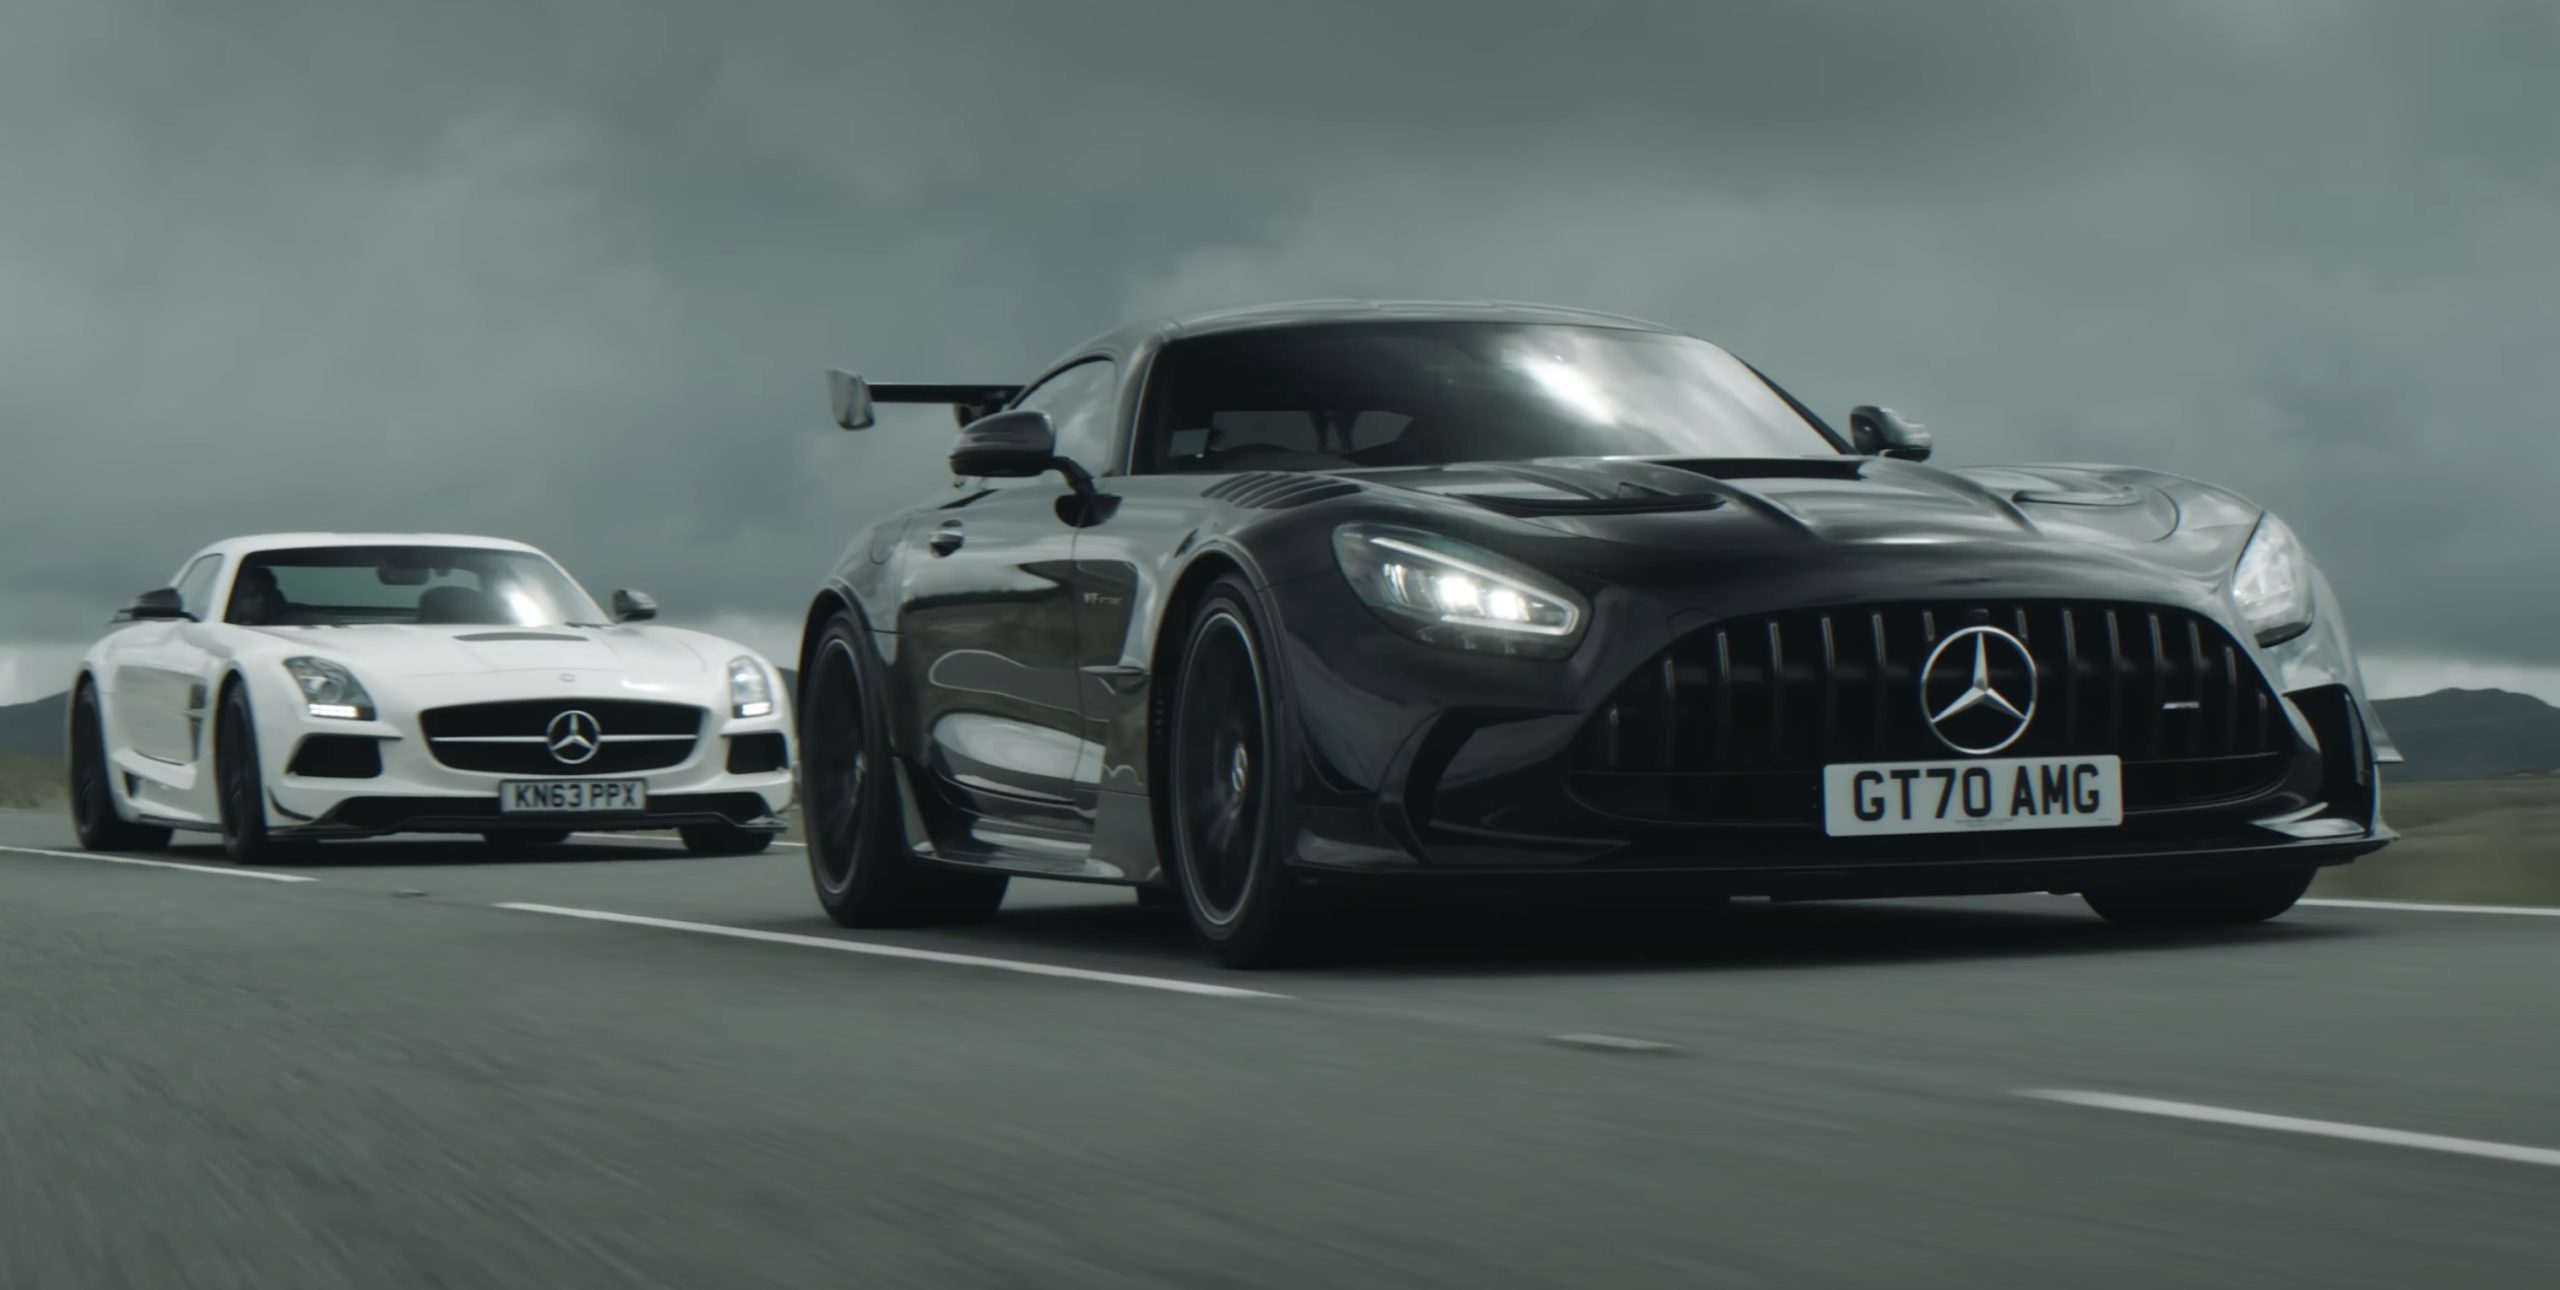 Back to Black: Henry Catchpole pits the AMG GT and SLS head-to-head